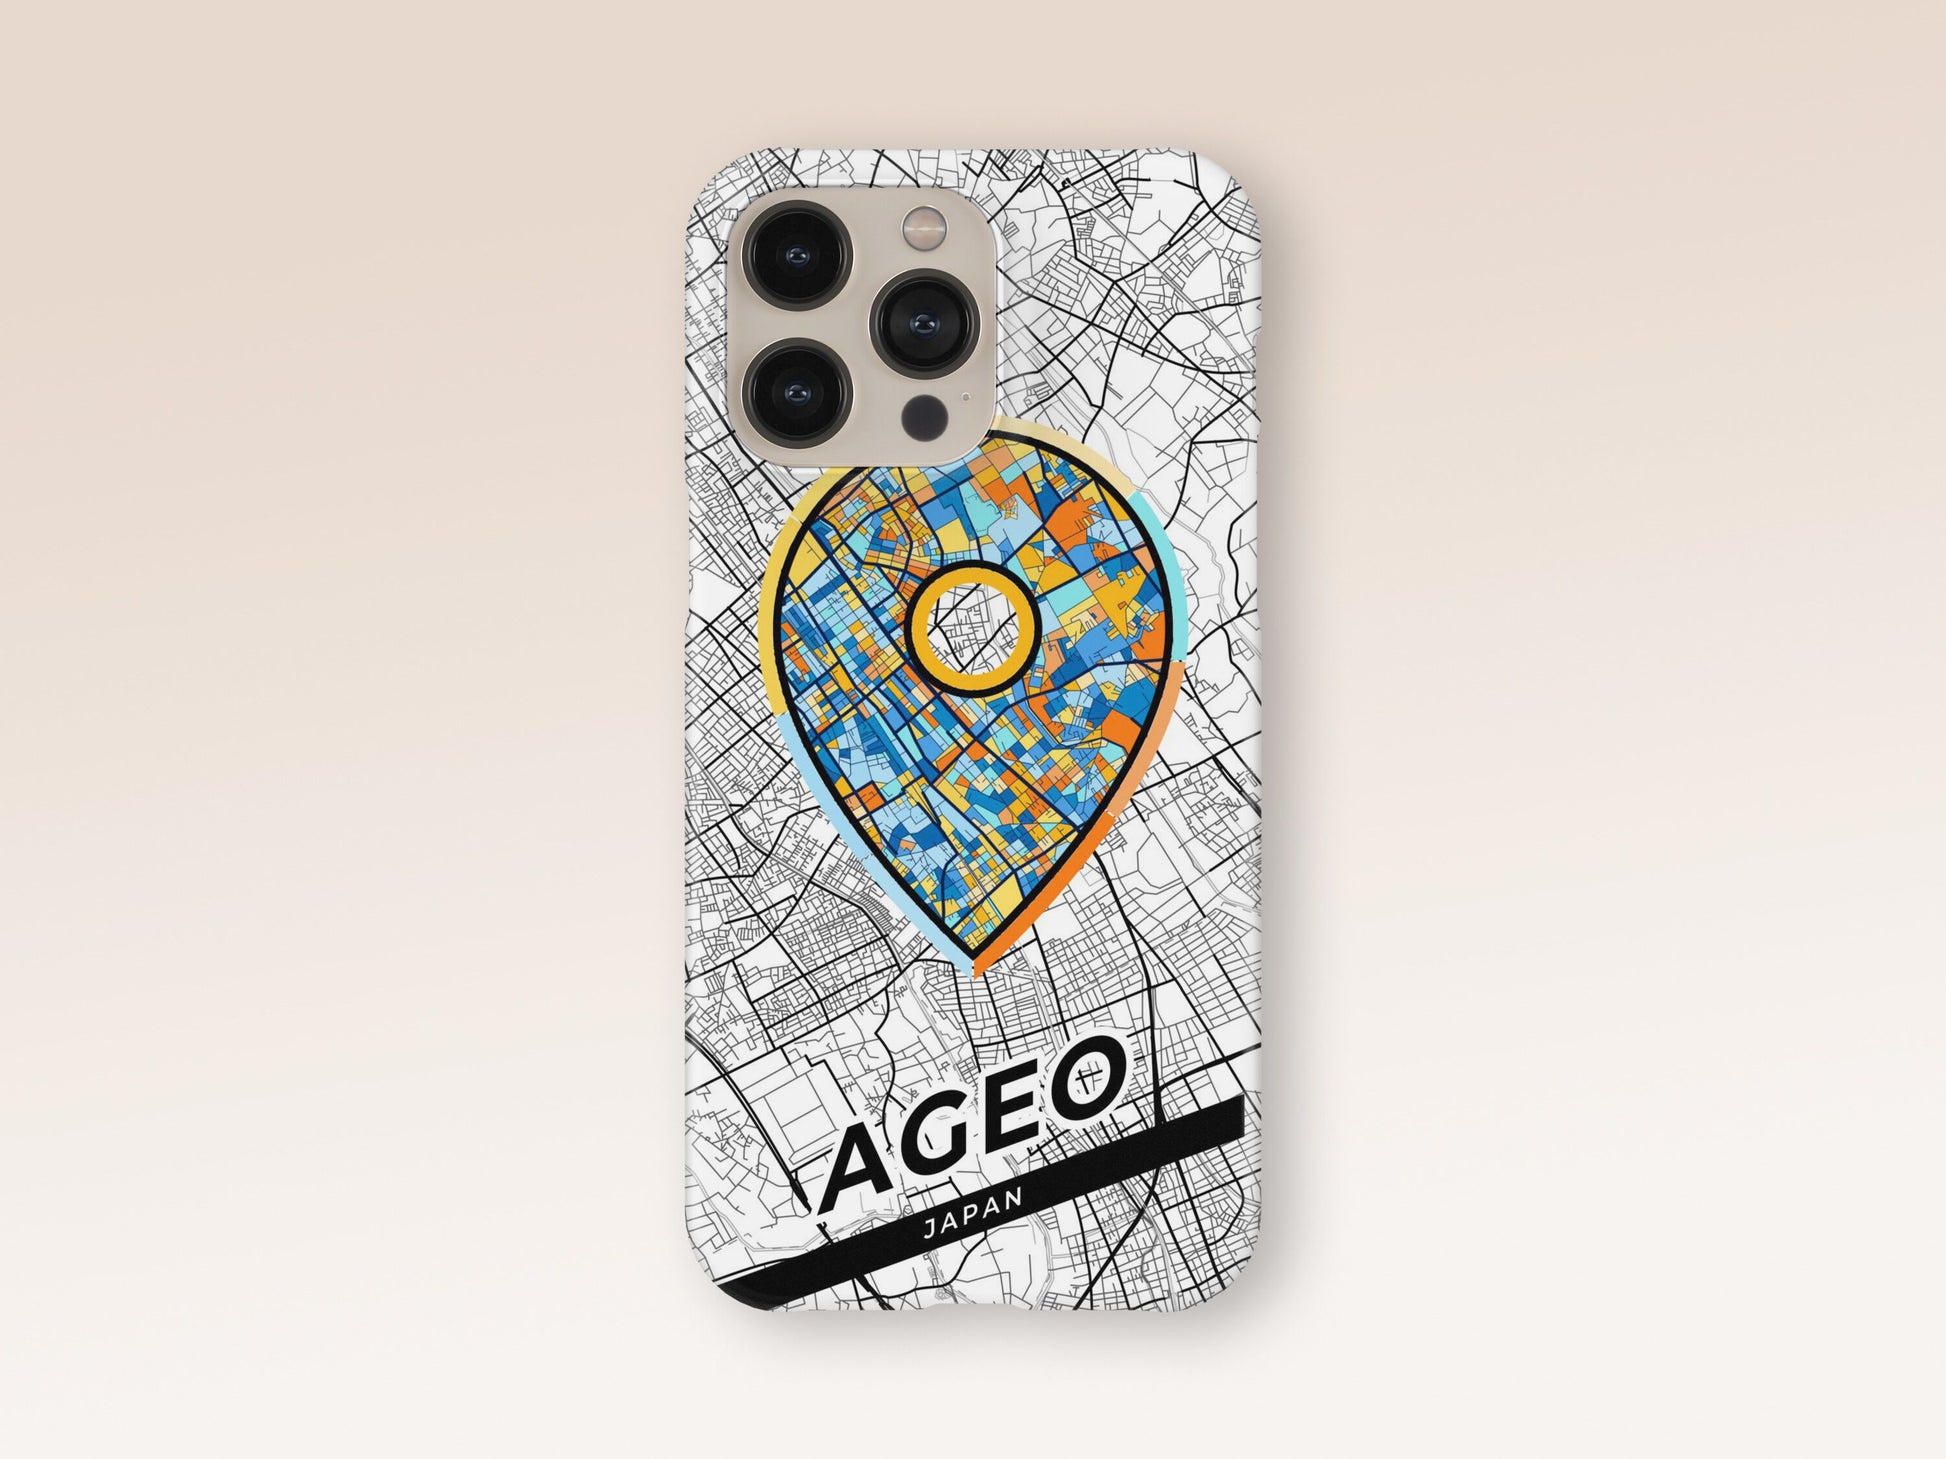 Ageo Japan slim phone case with colorful icon. Birthday, wedding or housewarming gift. Couple match cases. 1